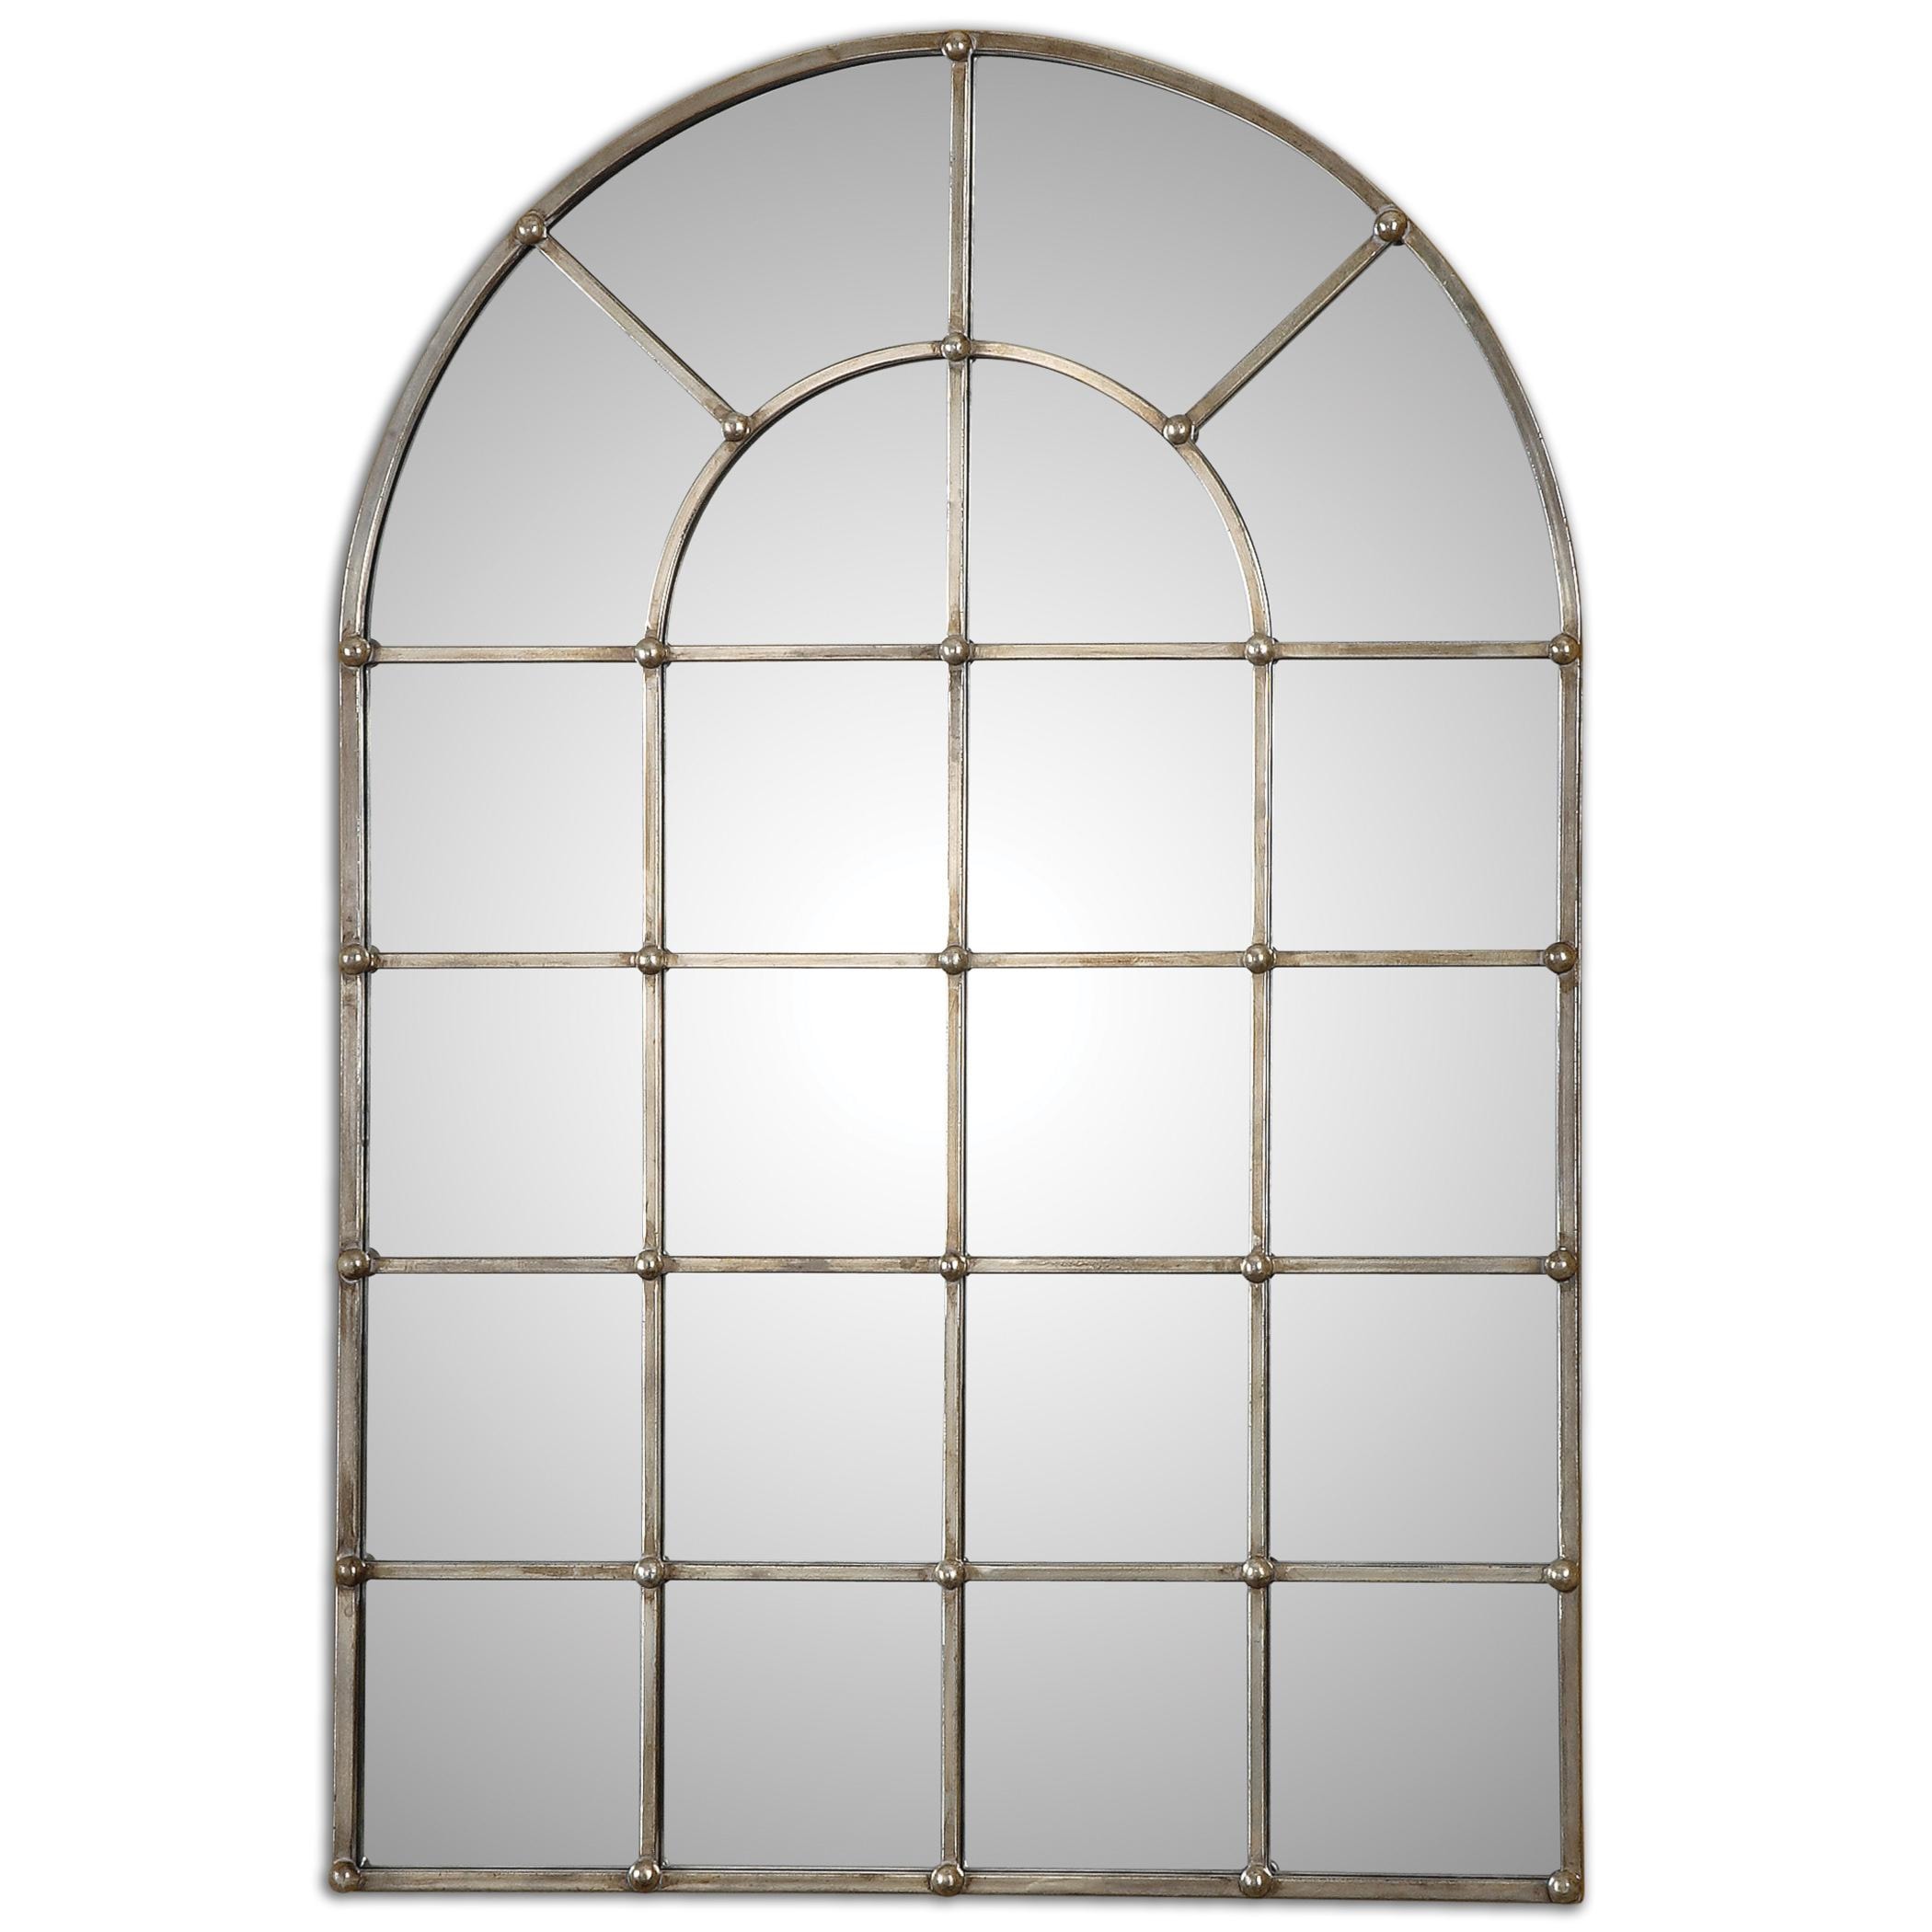 Uttermost Arched Mirrors Barwell Arch Window Mirror Lagniappe Home Store  Mirrors Wall